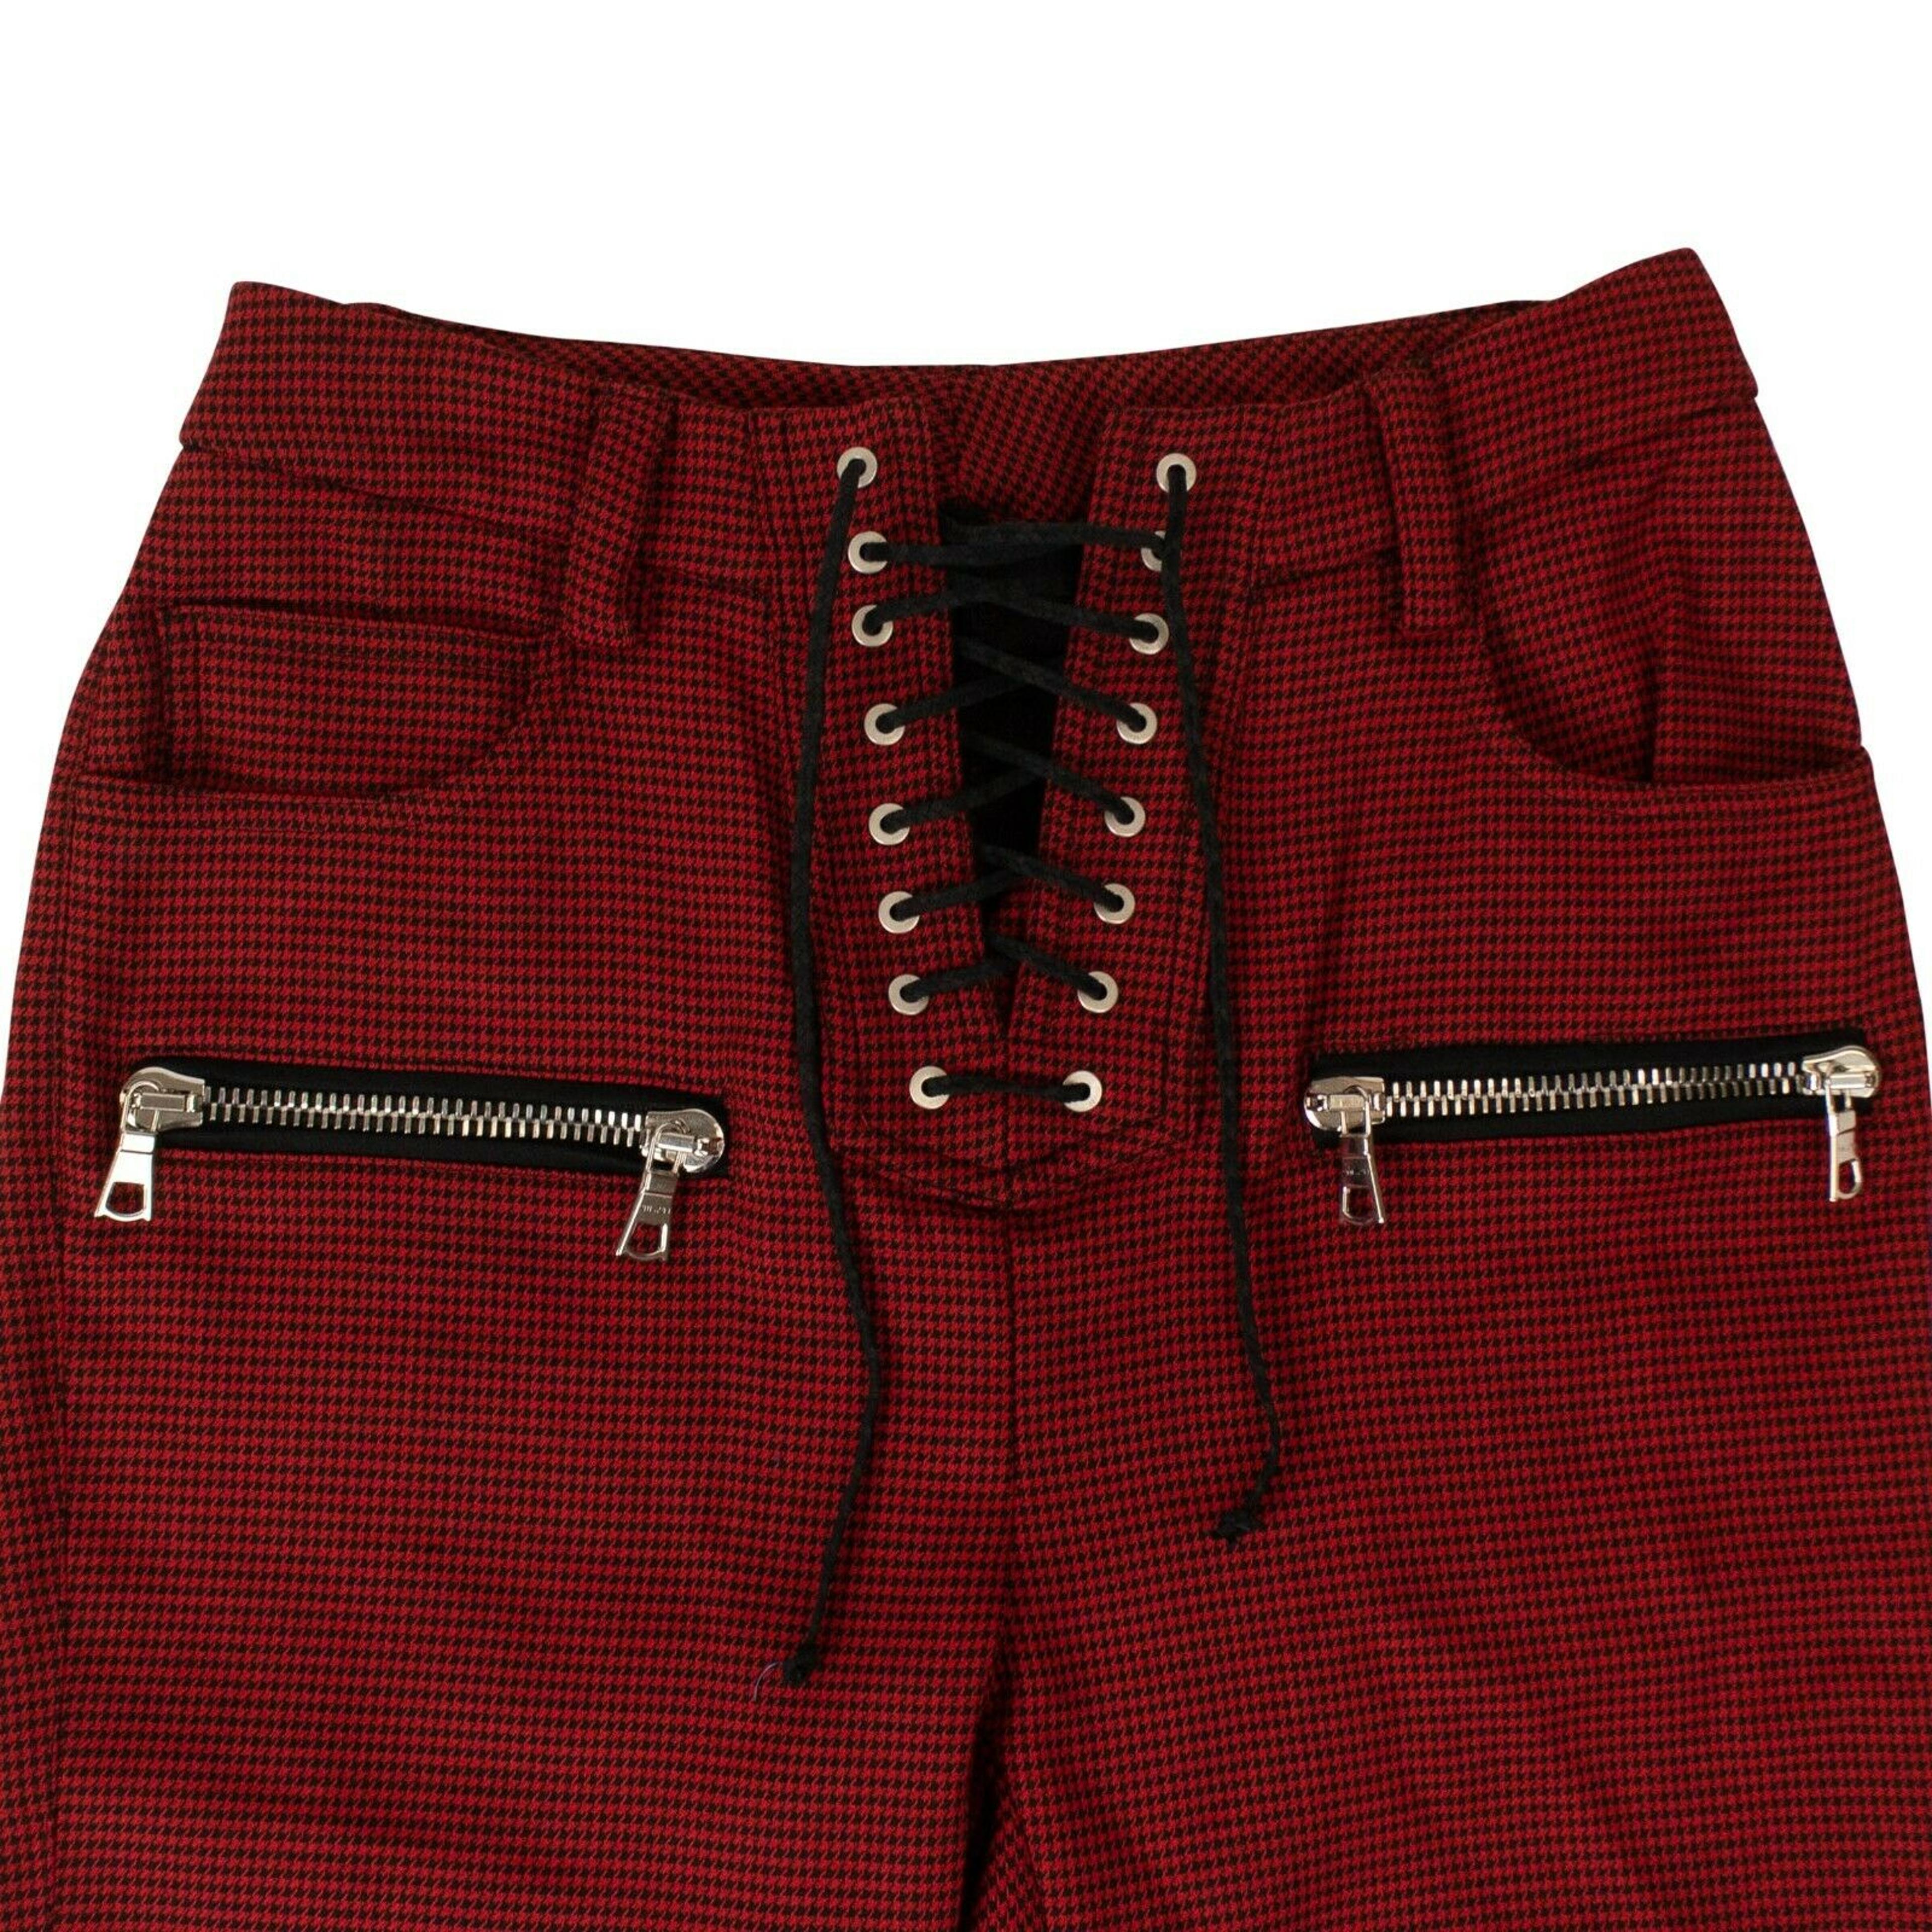 Alternate View 6 of Red Houndstooth Print Pants